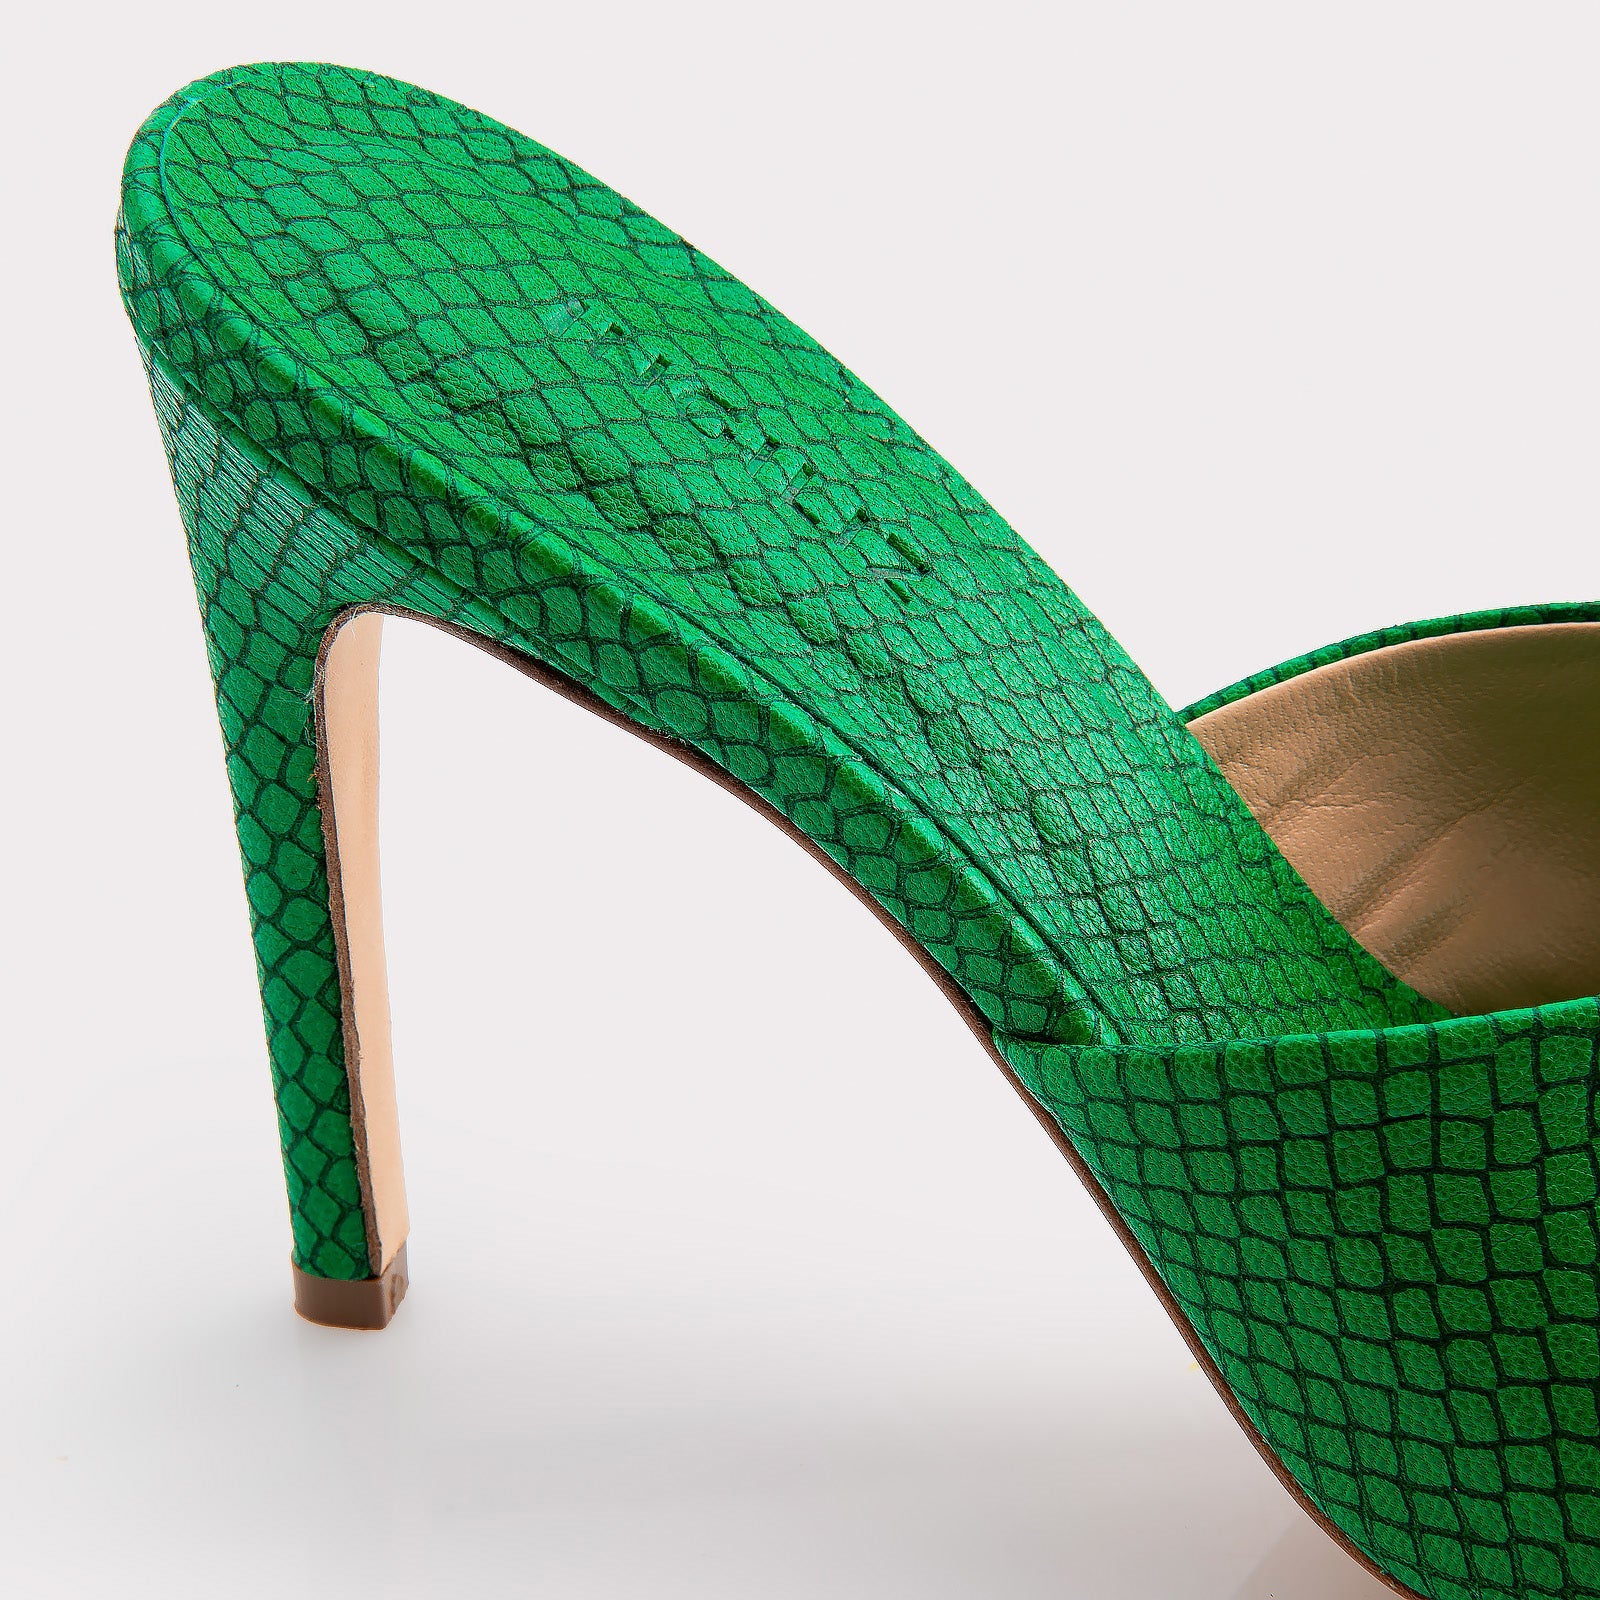 KALINA 05 GREEN LIZZARD EMBOSSED LEATHER MULES